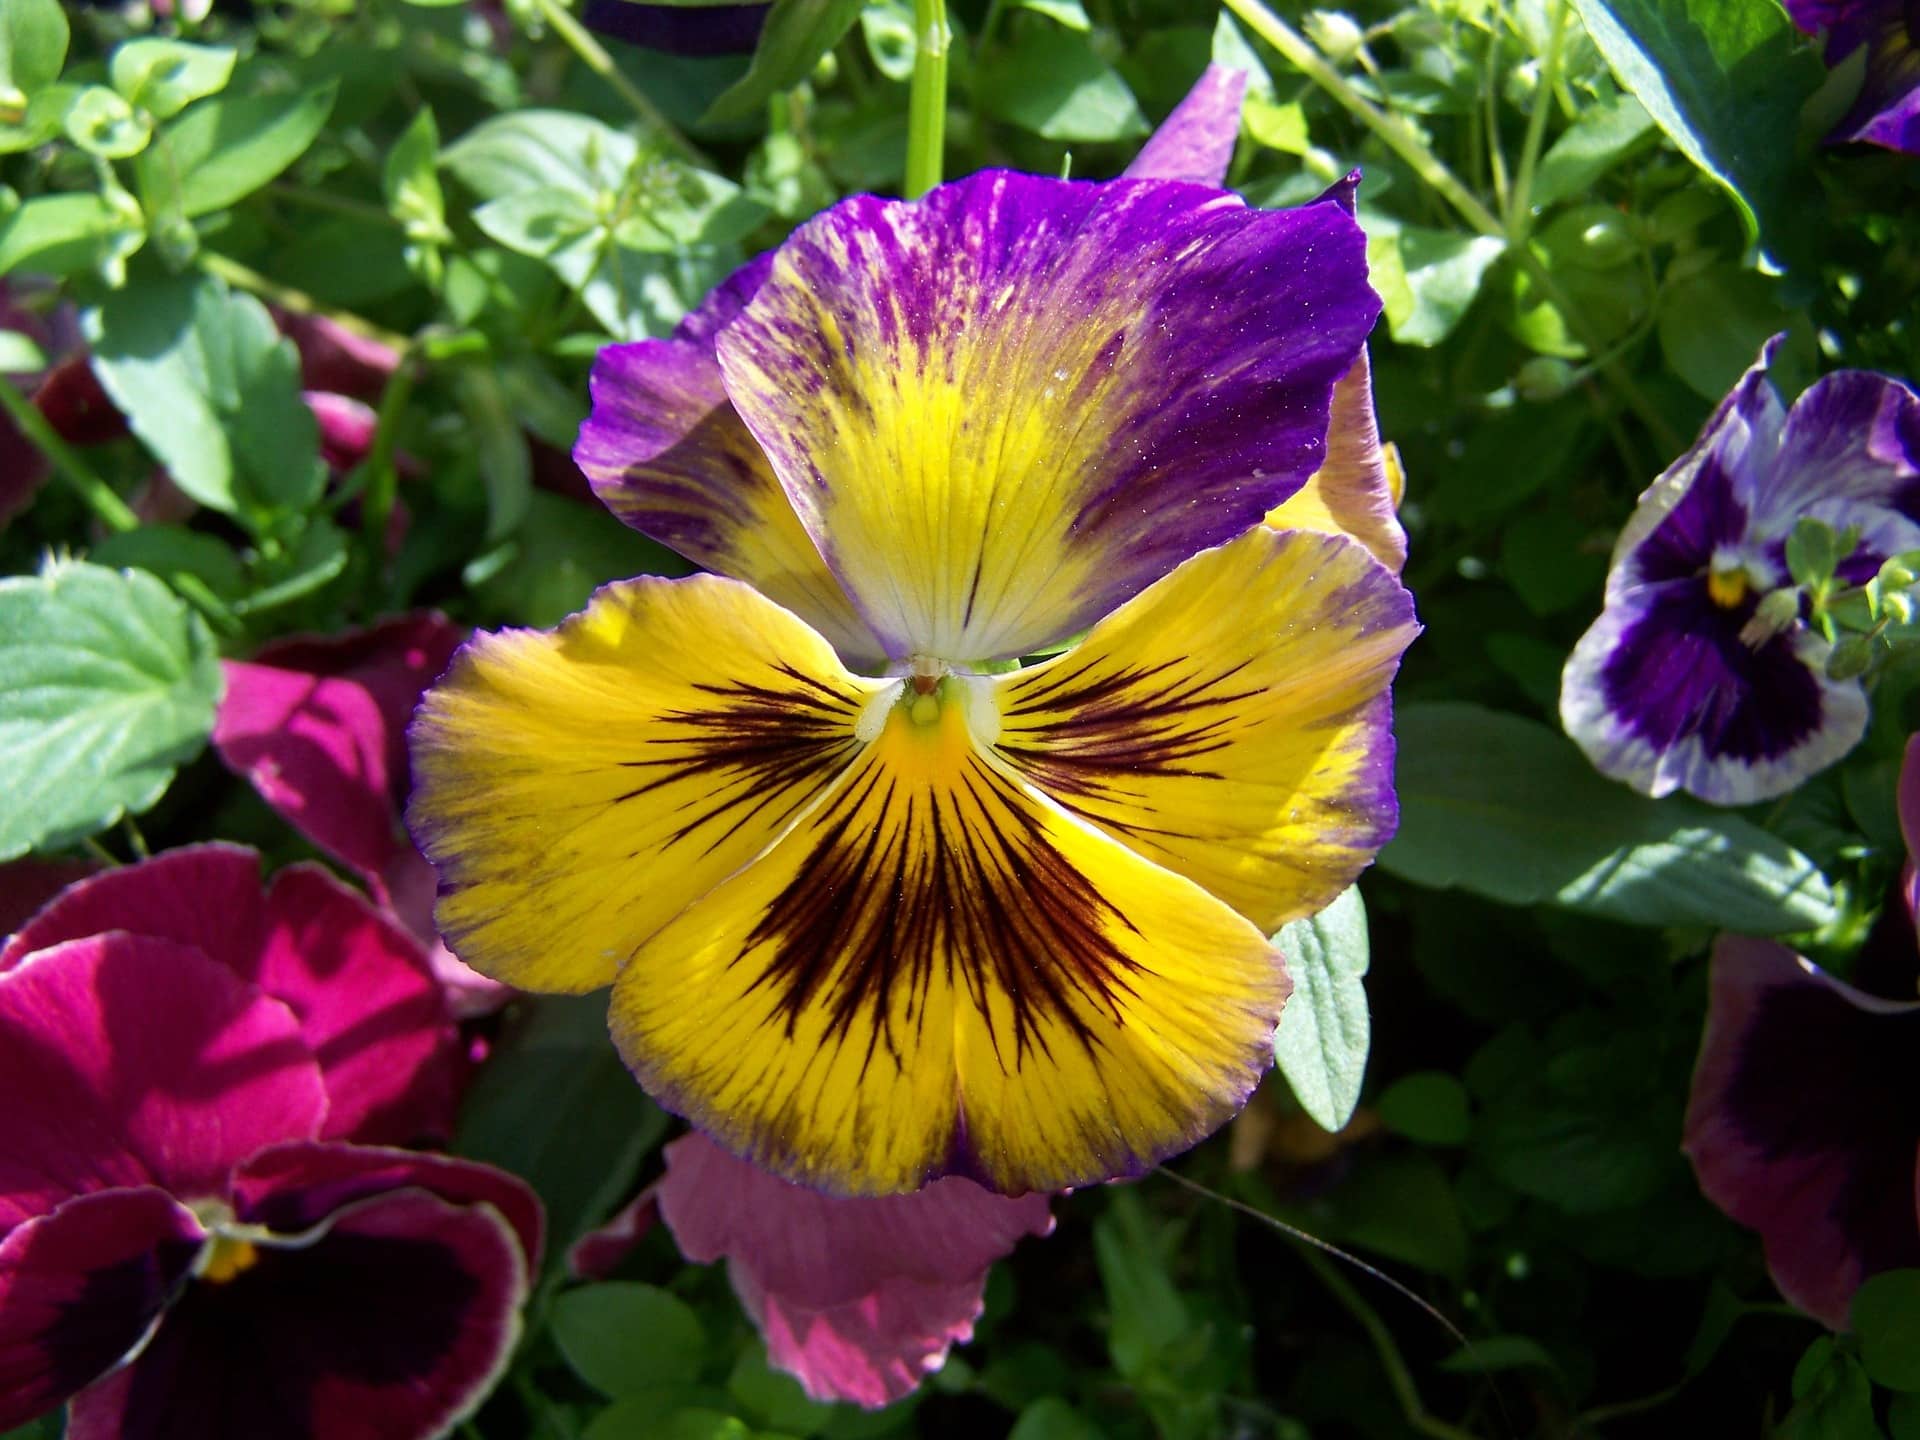 ScenicScape Landscaping, Lawn Care, and Irrigation - Image 04 for Our Landscapers Love Flowers - Pansies